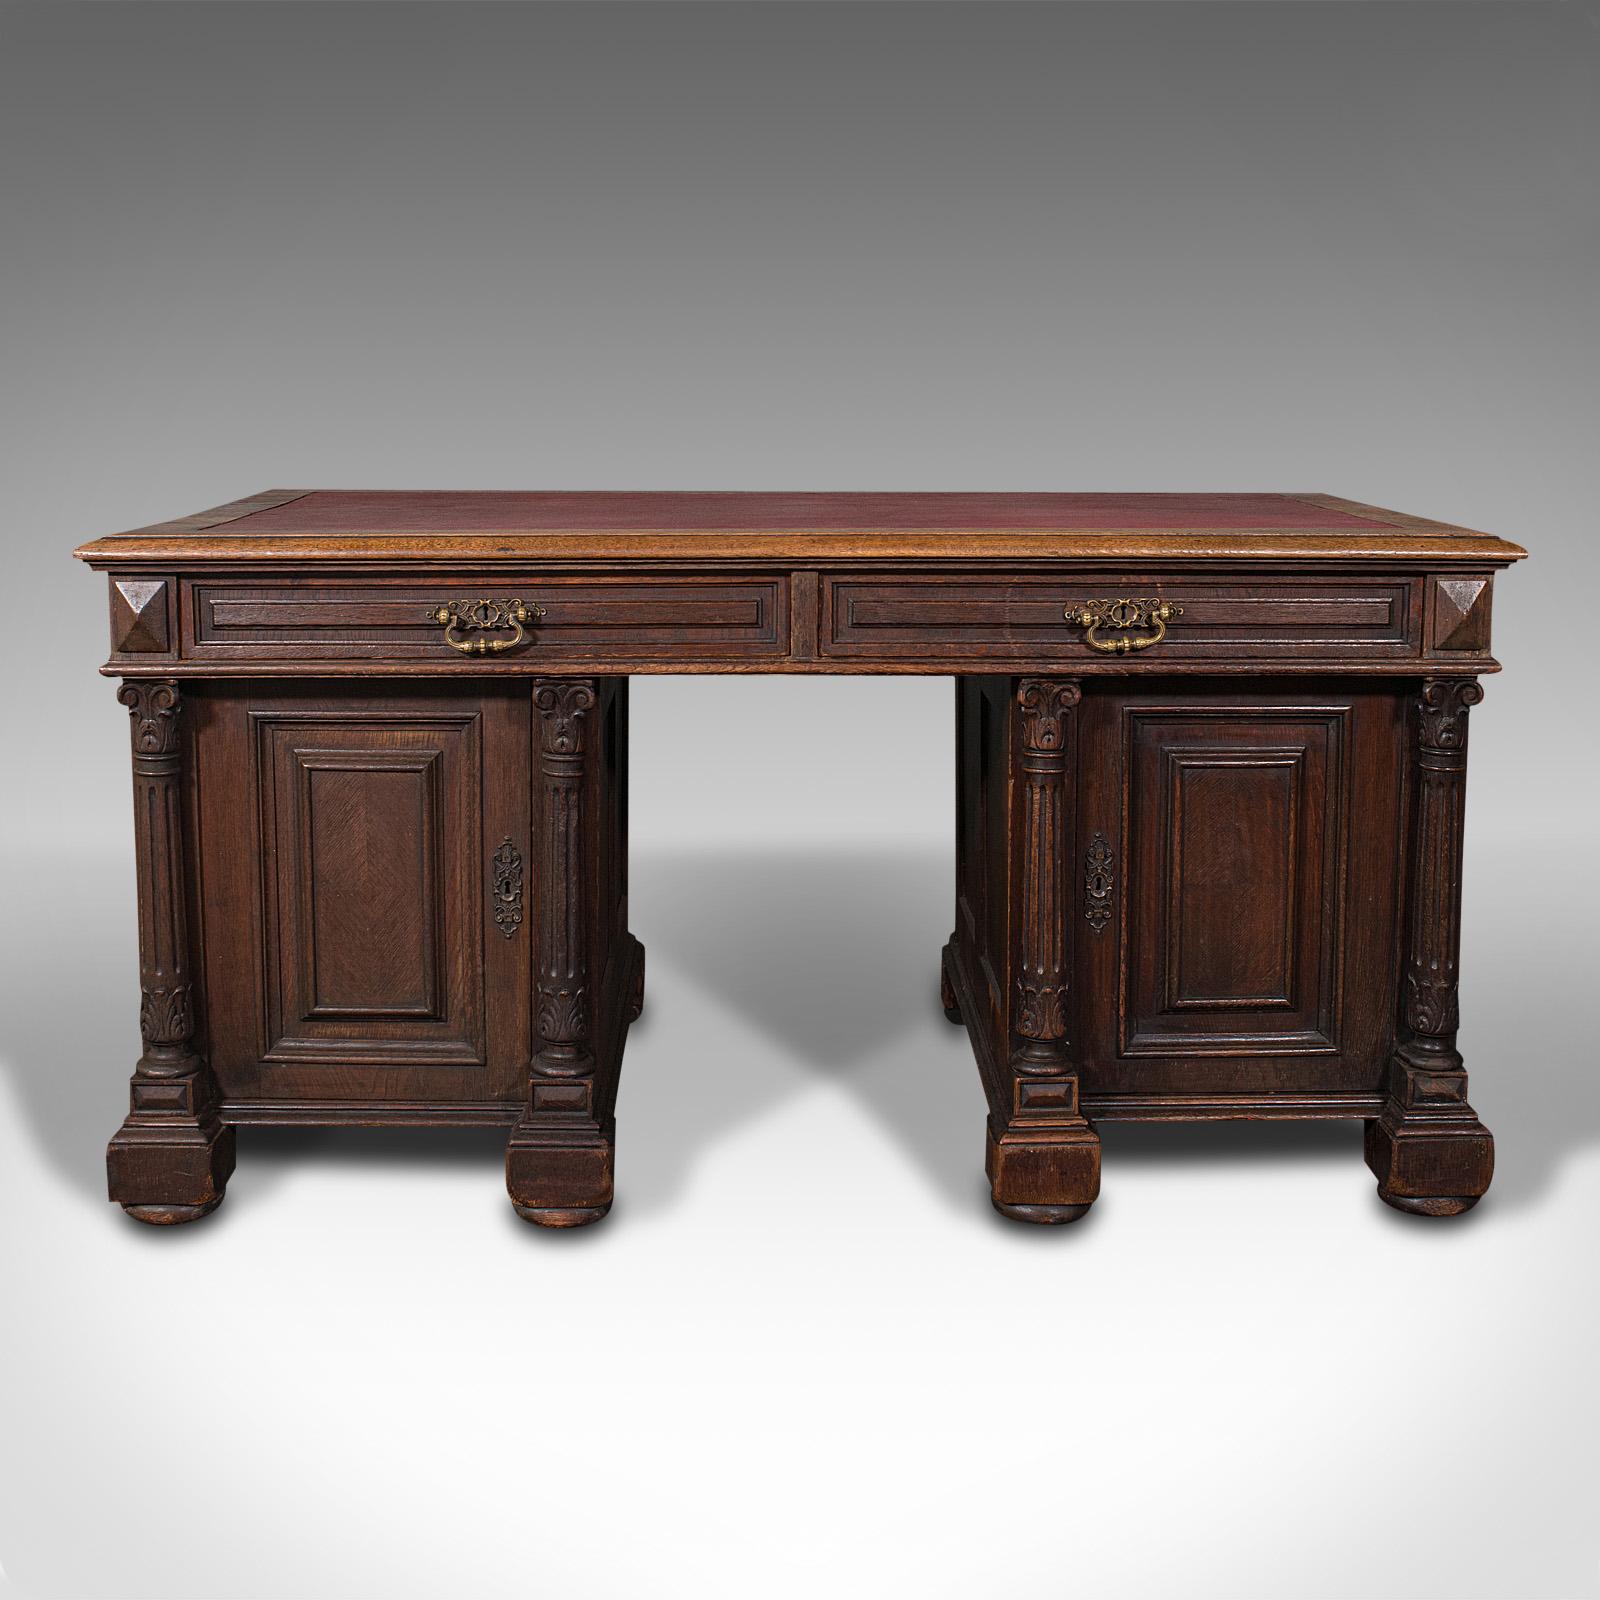 This is a large antique pedestal desk. An English, stout oak writing desk with Gothic revival taste, dating to the Victorian period, circa 1870.

Wonderfully imposing, substantial desk - ideal for the avid writer or home office
Displays a